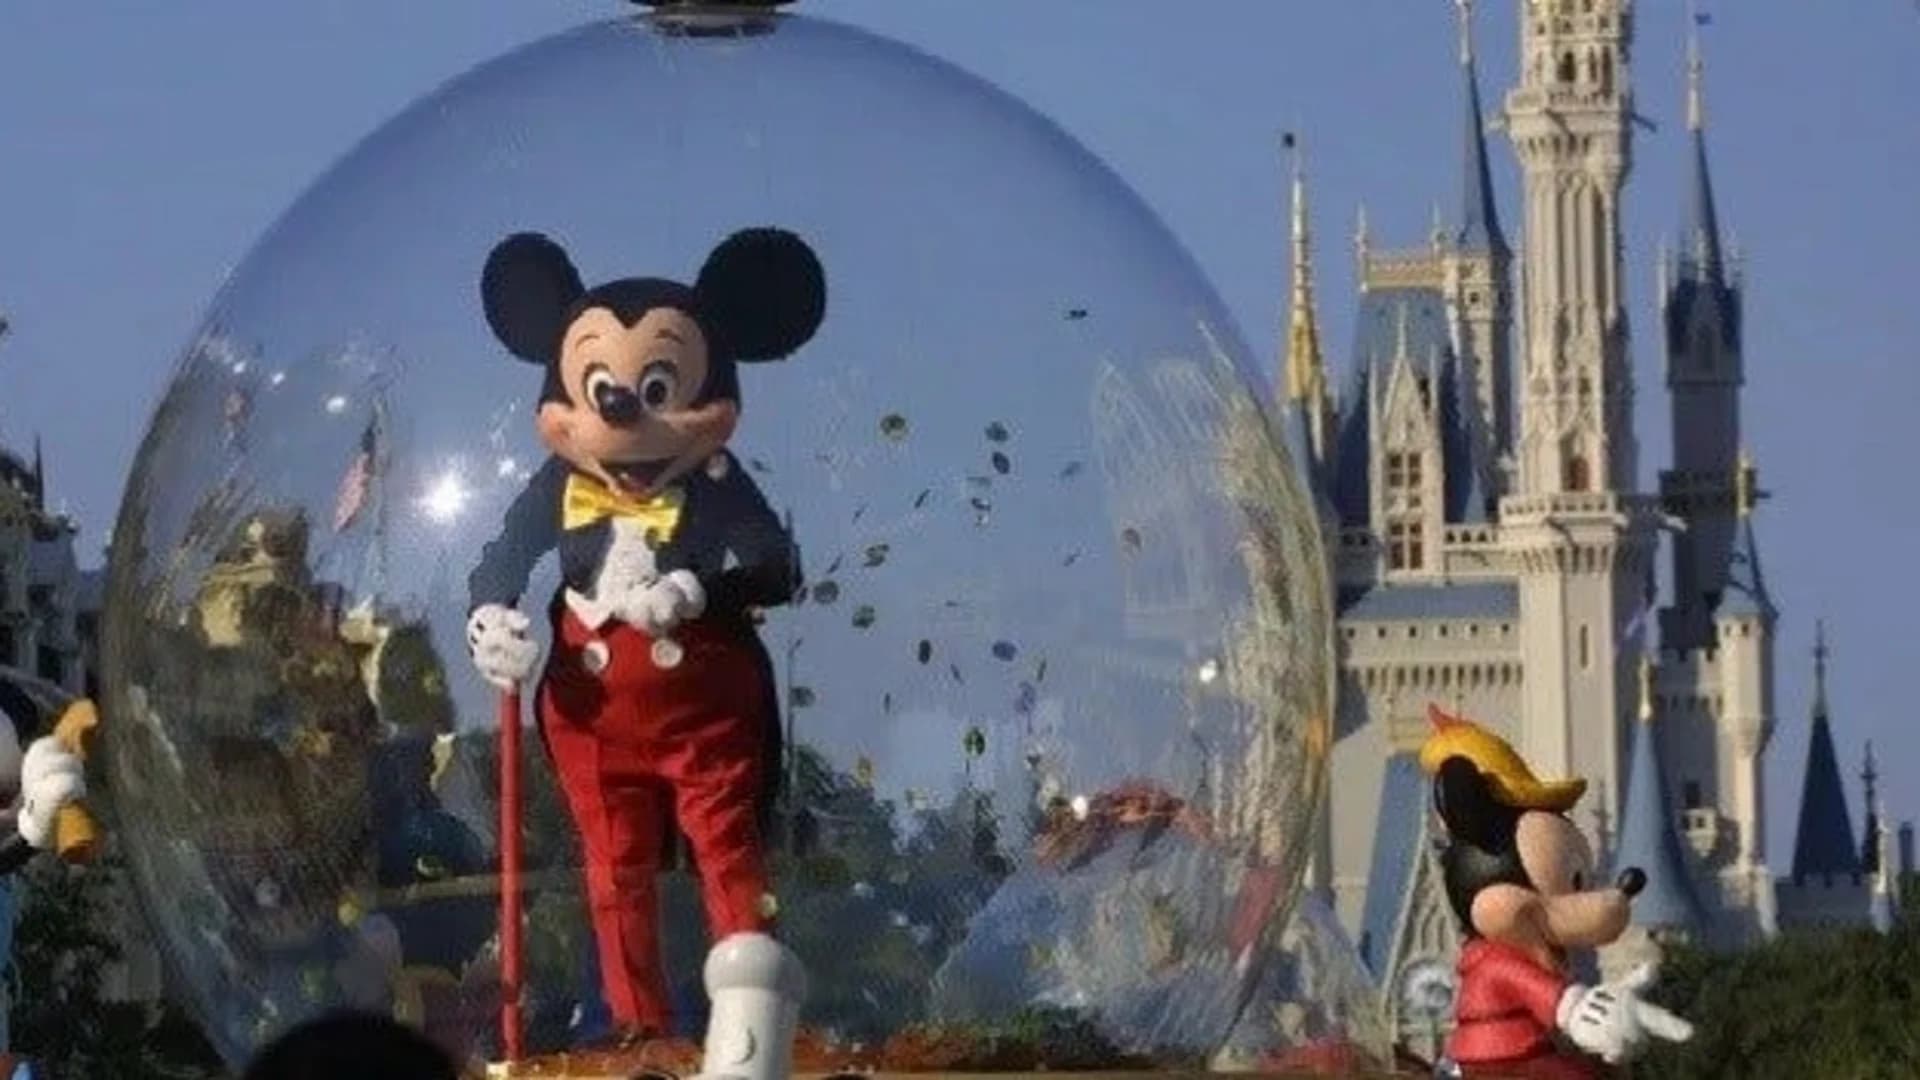 Increased prices at Disney parks in Florida, California